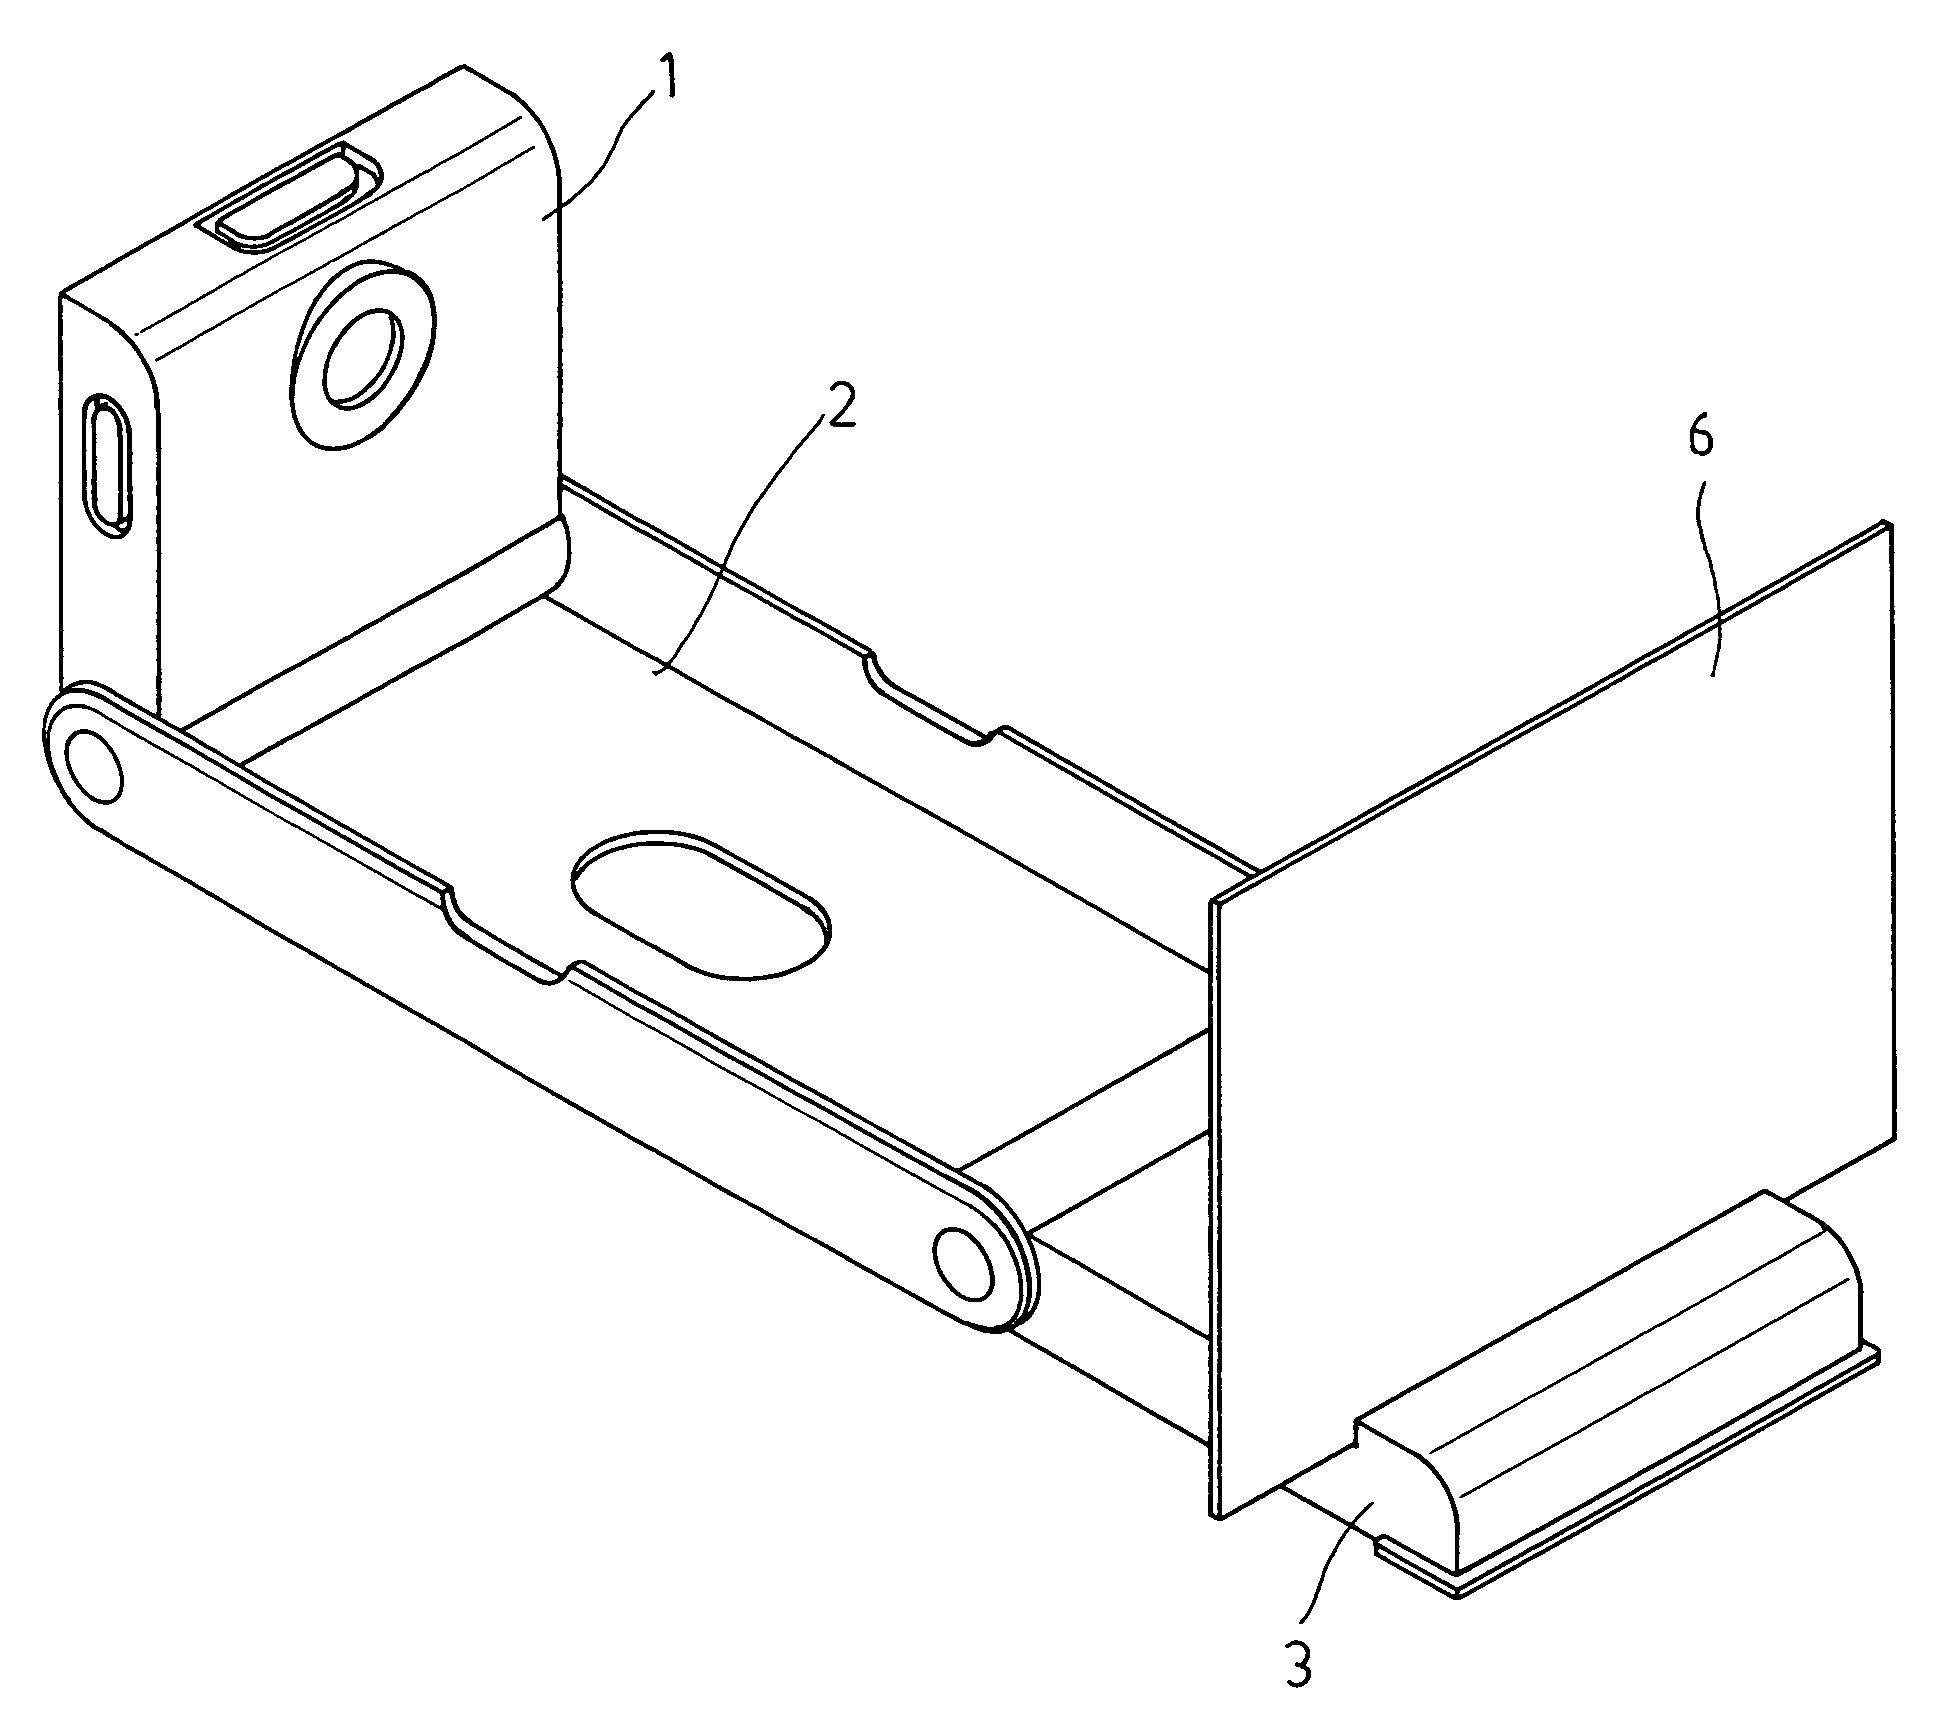 Foldable picture-taking device with scanning function